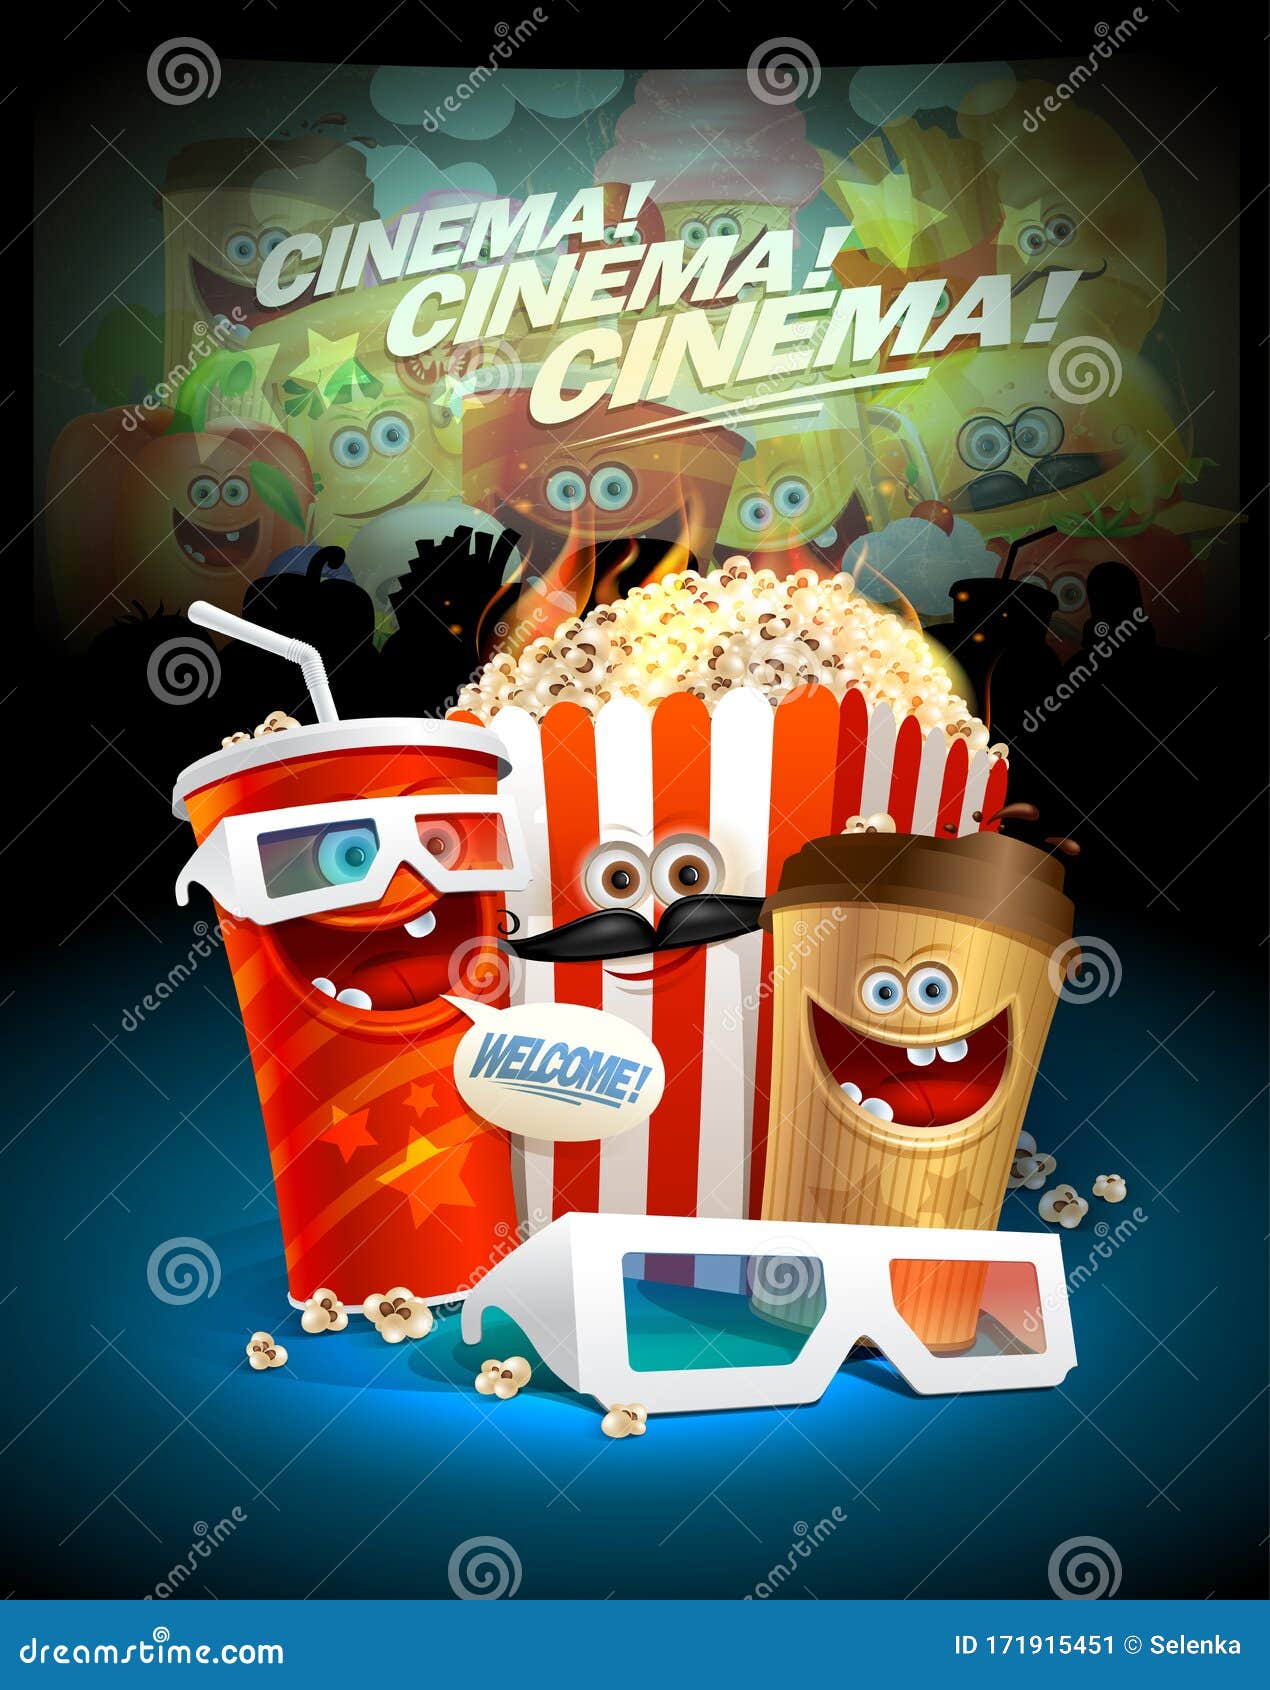 Cinema Poster Design Template with Funny Food Symbols - Popcorn Box, Soda  Drink, Coffee and 3D Glasses Stock Vector - Illustration of eating, scene:  171915451